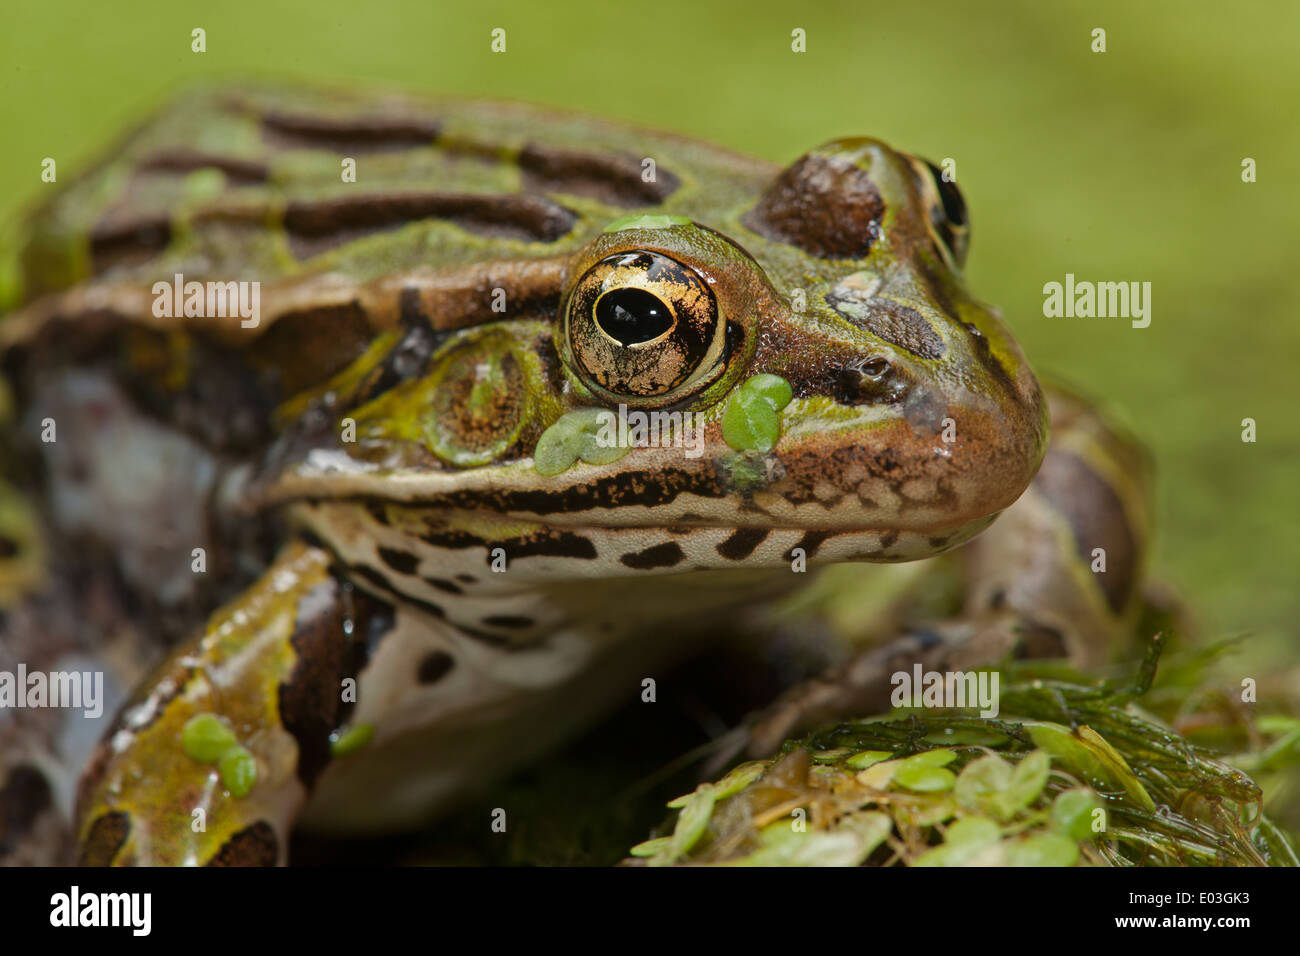 Leopard frog, Rana pipiens, New York, in pond covered with duckweed Stock Photo